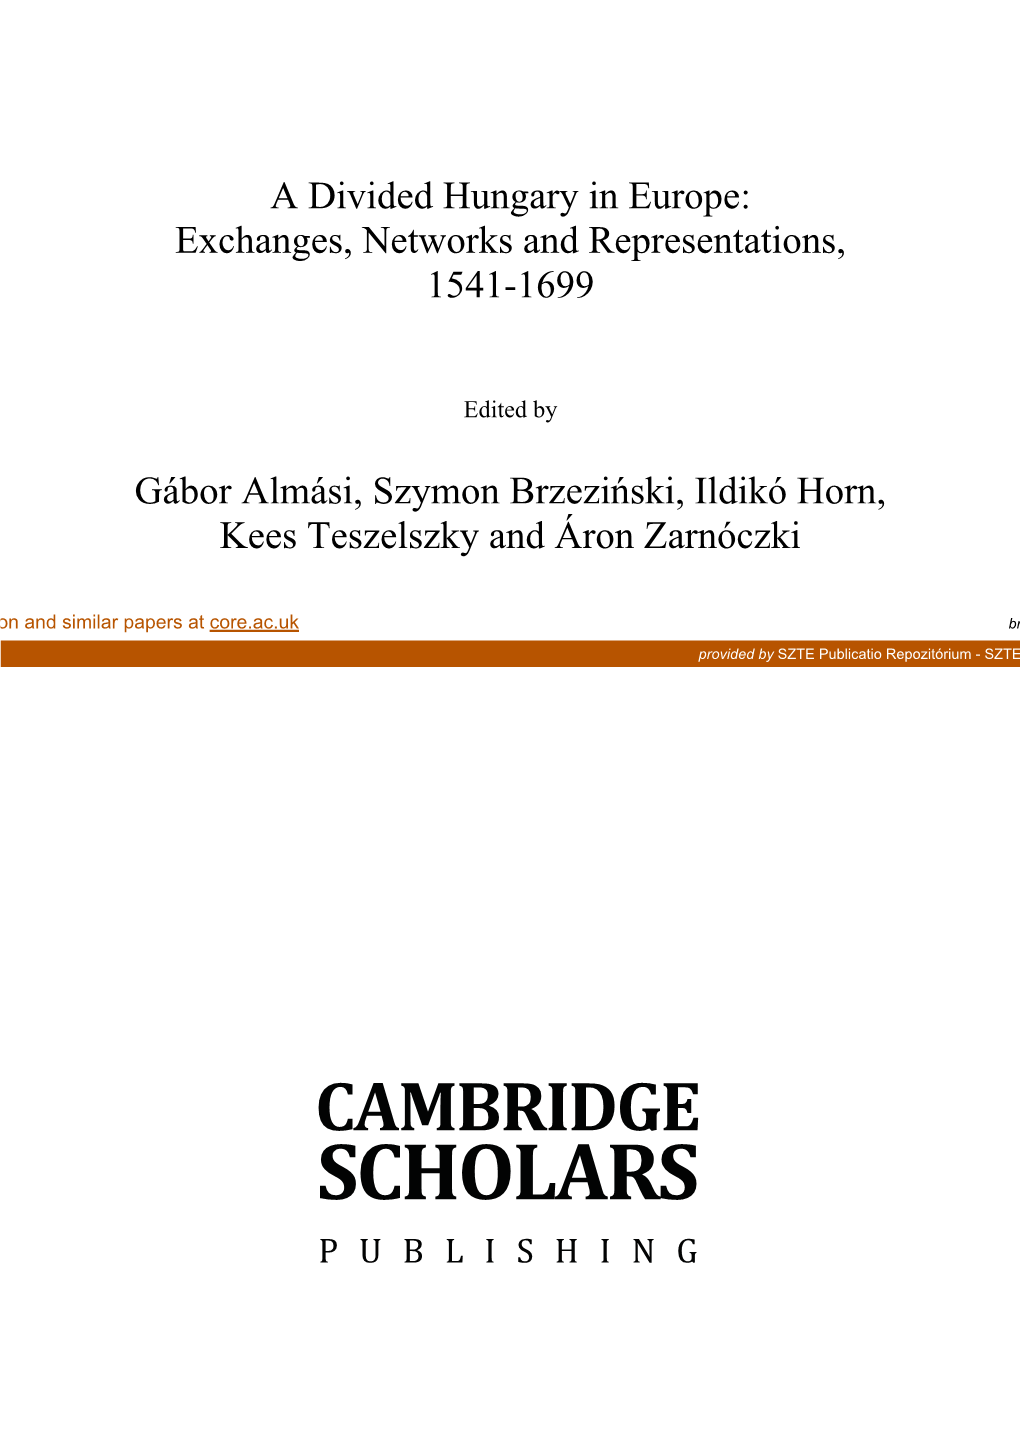 Exchanges, Networks and Representations, 1541-1699